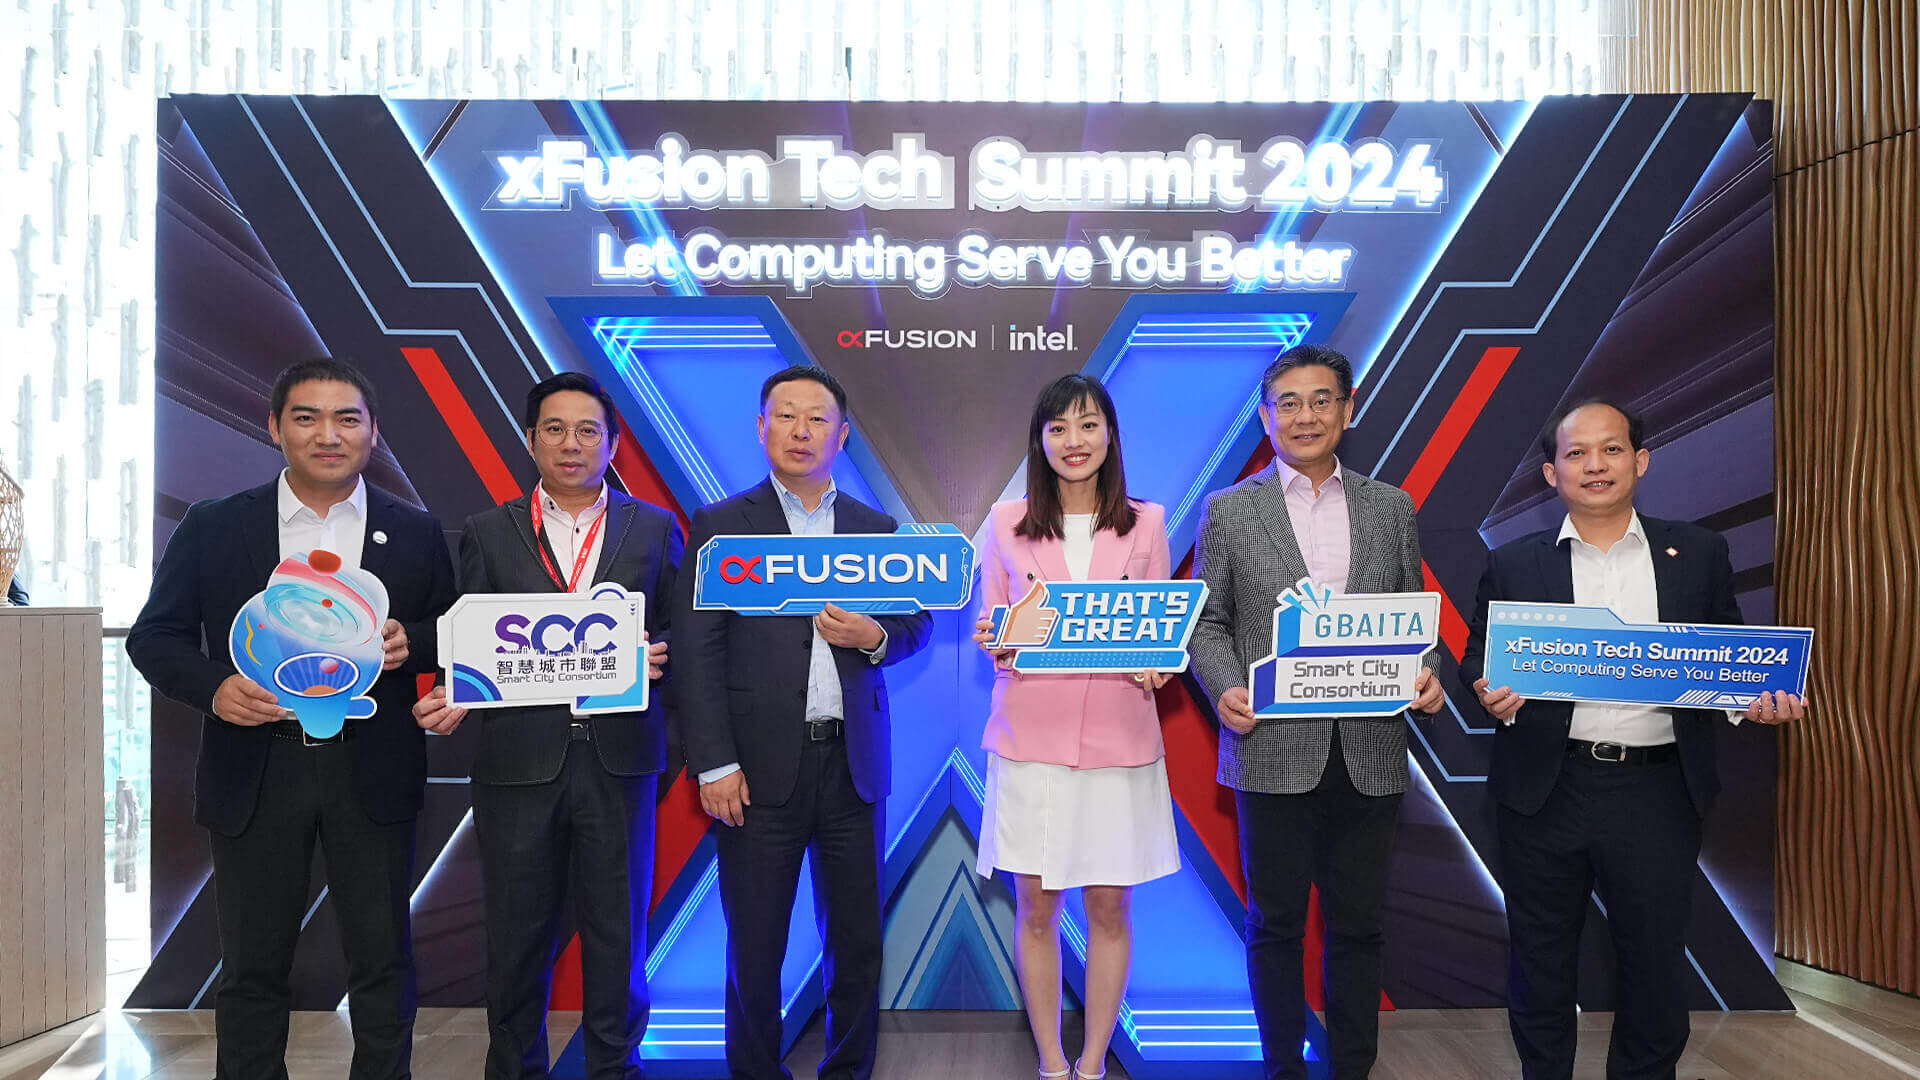 xFusion Tech Summit 2024 and Partner Conference Successfully Concluded